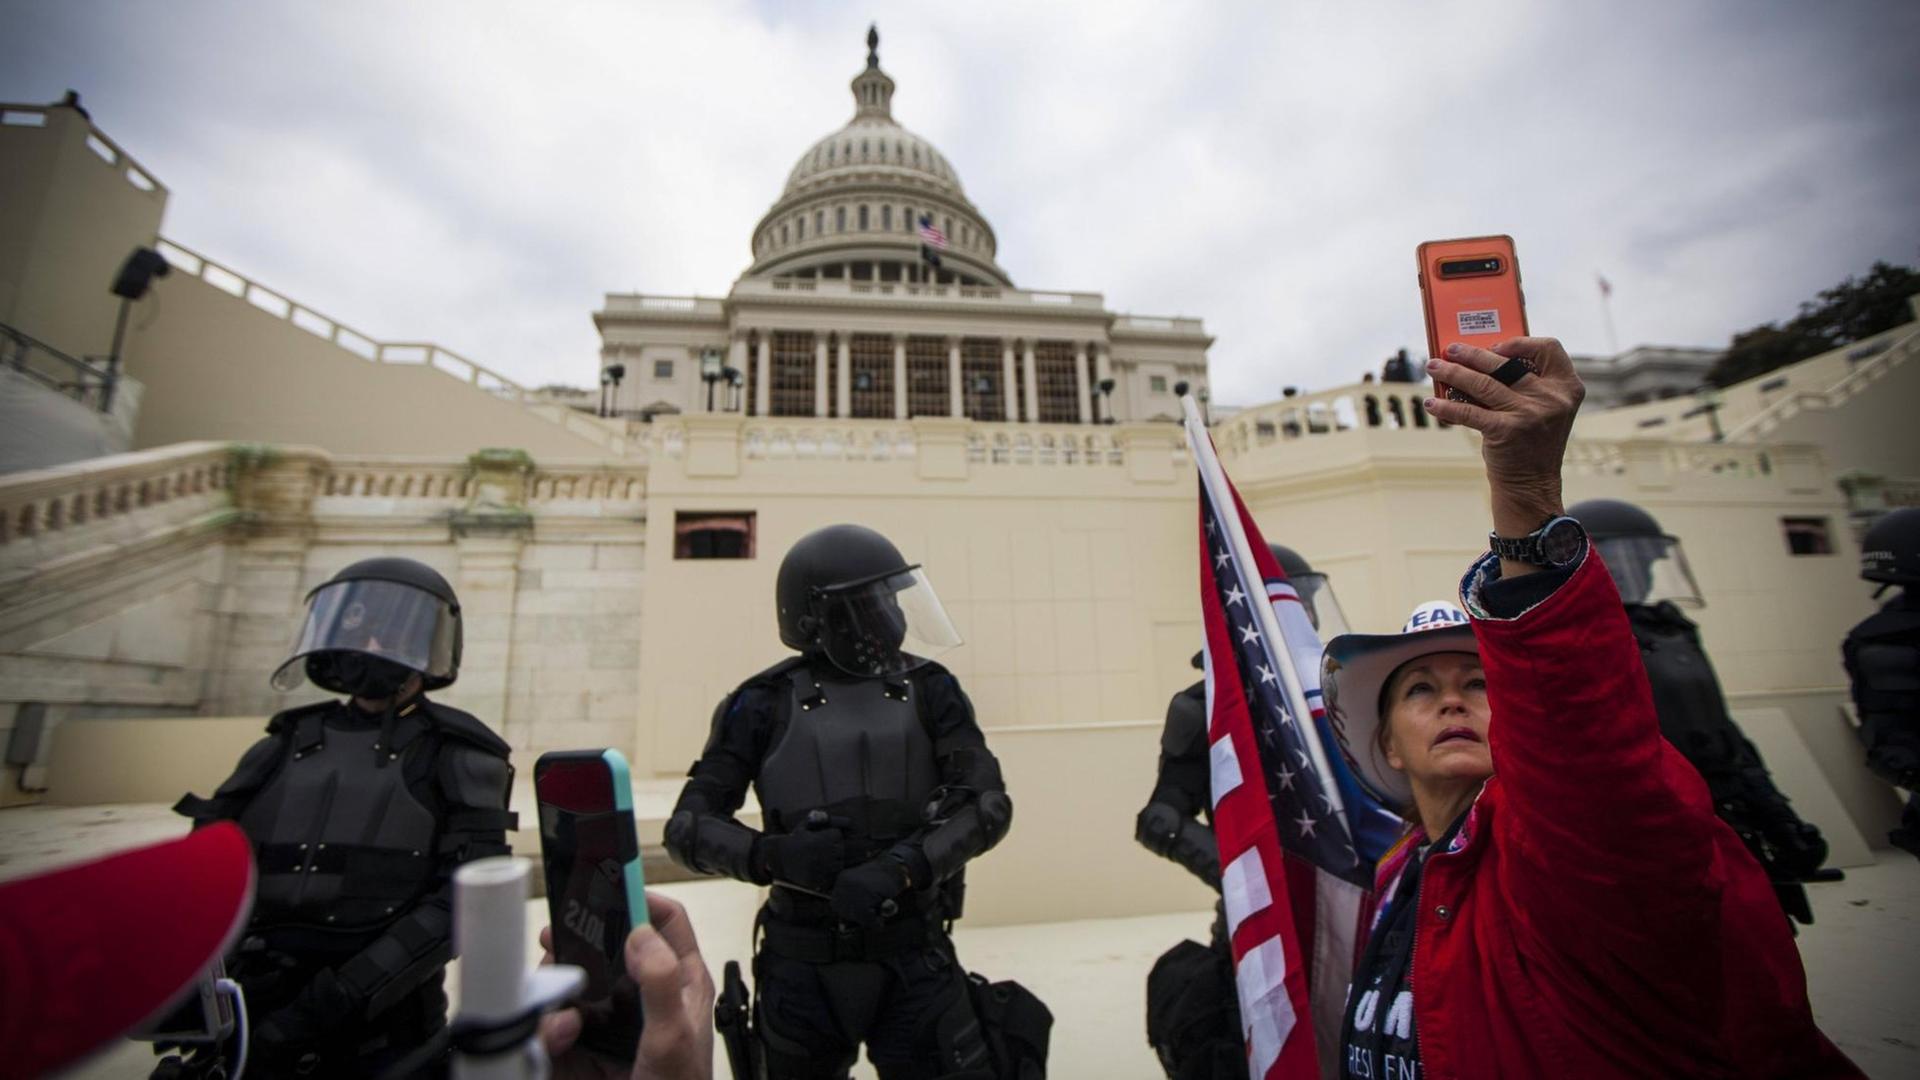 January 6, 2021, Washington Dc, USA: A Trump supporter takes a selfie with Capitol Police in riot gear on Wednesday Jan. 6, 2021 in Washington D.C. Trump supporters stormed the barriers of the US Capitol Building and resulted in a death of a young woman. Washington Dc USA - ZUMAc214 20210106_znp_c214_006 Copyright: xJohnxC.xClarkx